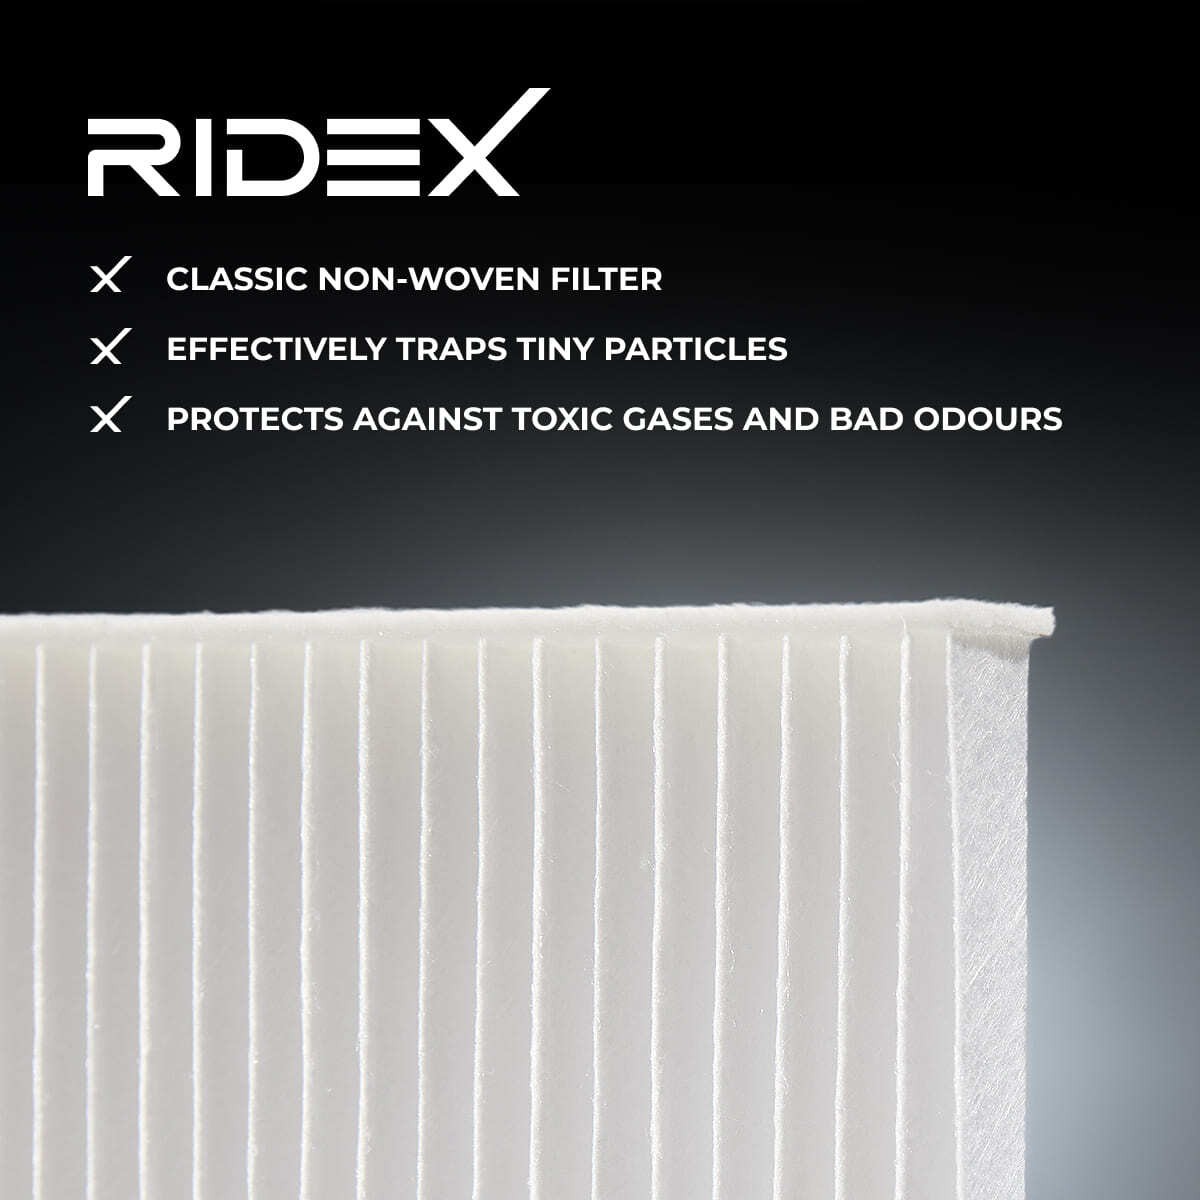 424I0408 Air con filter 424I0408 RIDEX Activated Carbon Filter, 250 mm x 180 mm x 35 mm